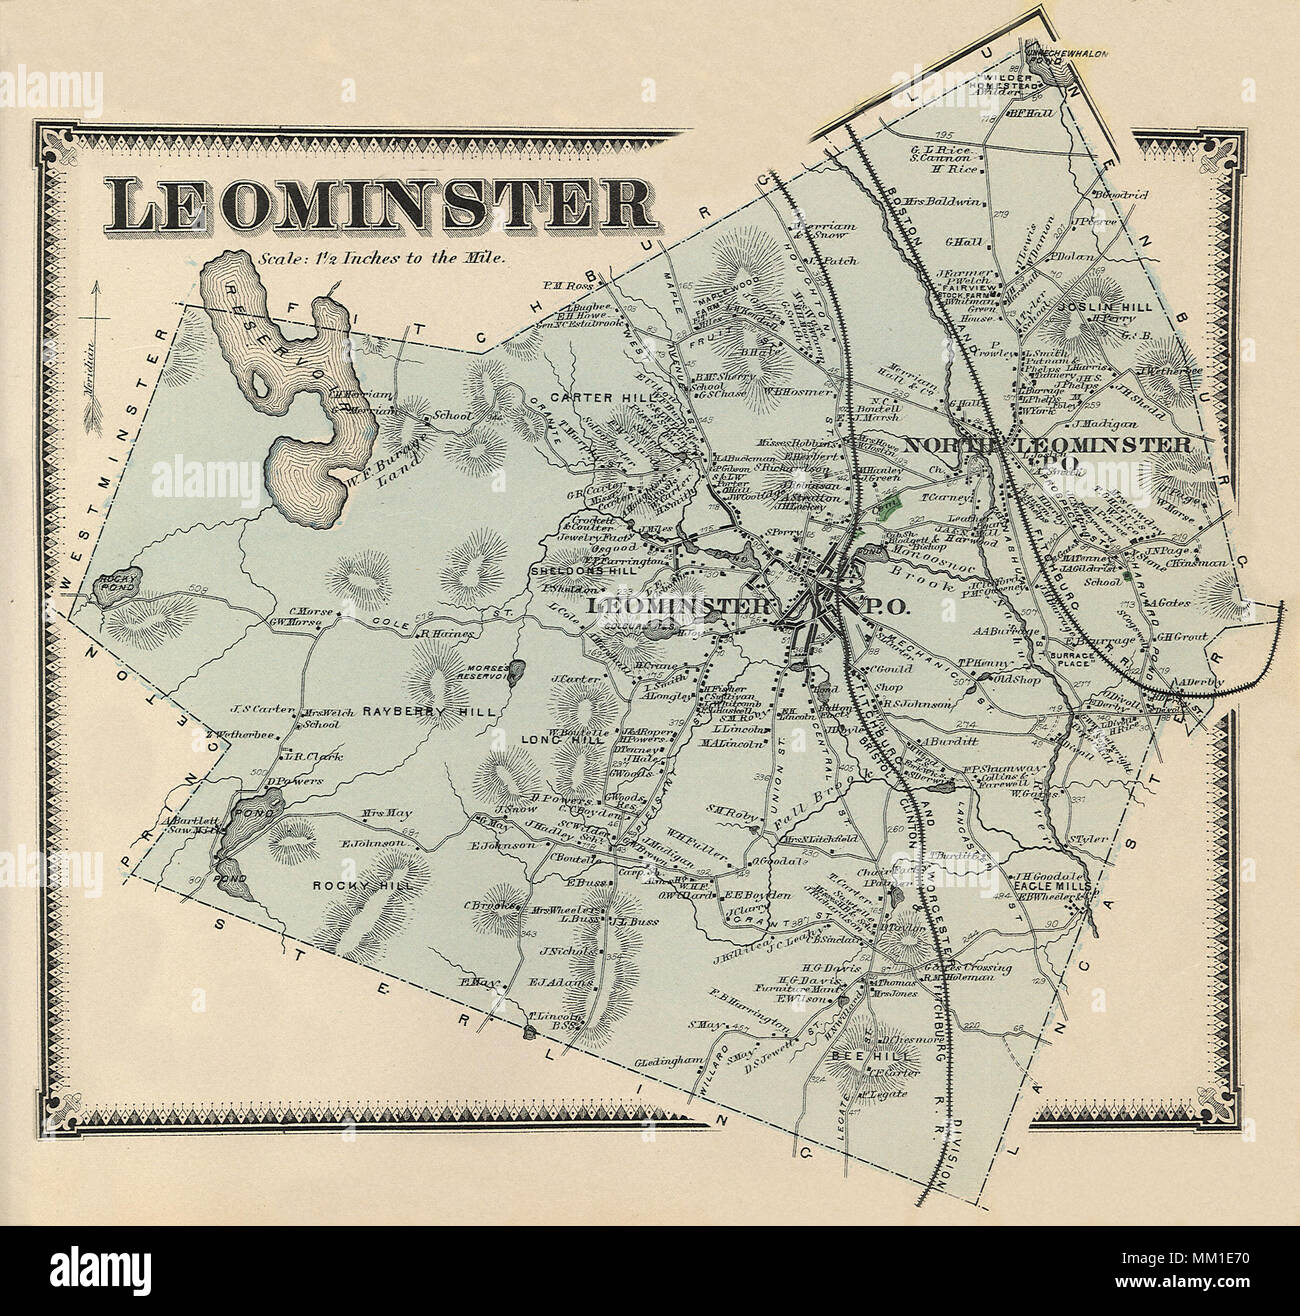 Map of North Leominster. 1870 Stock Photo